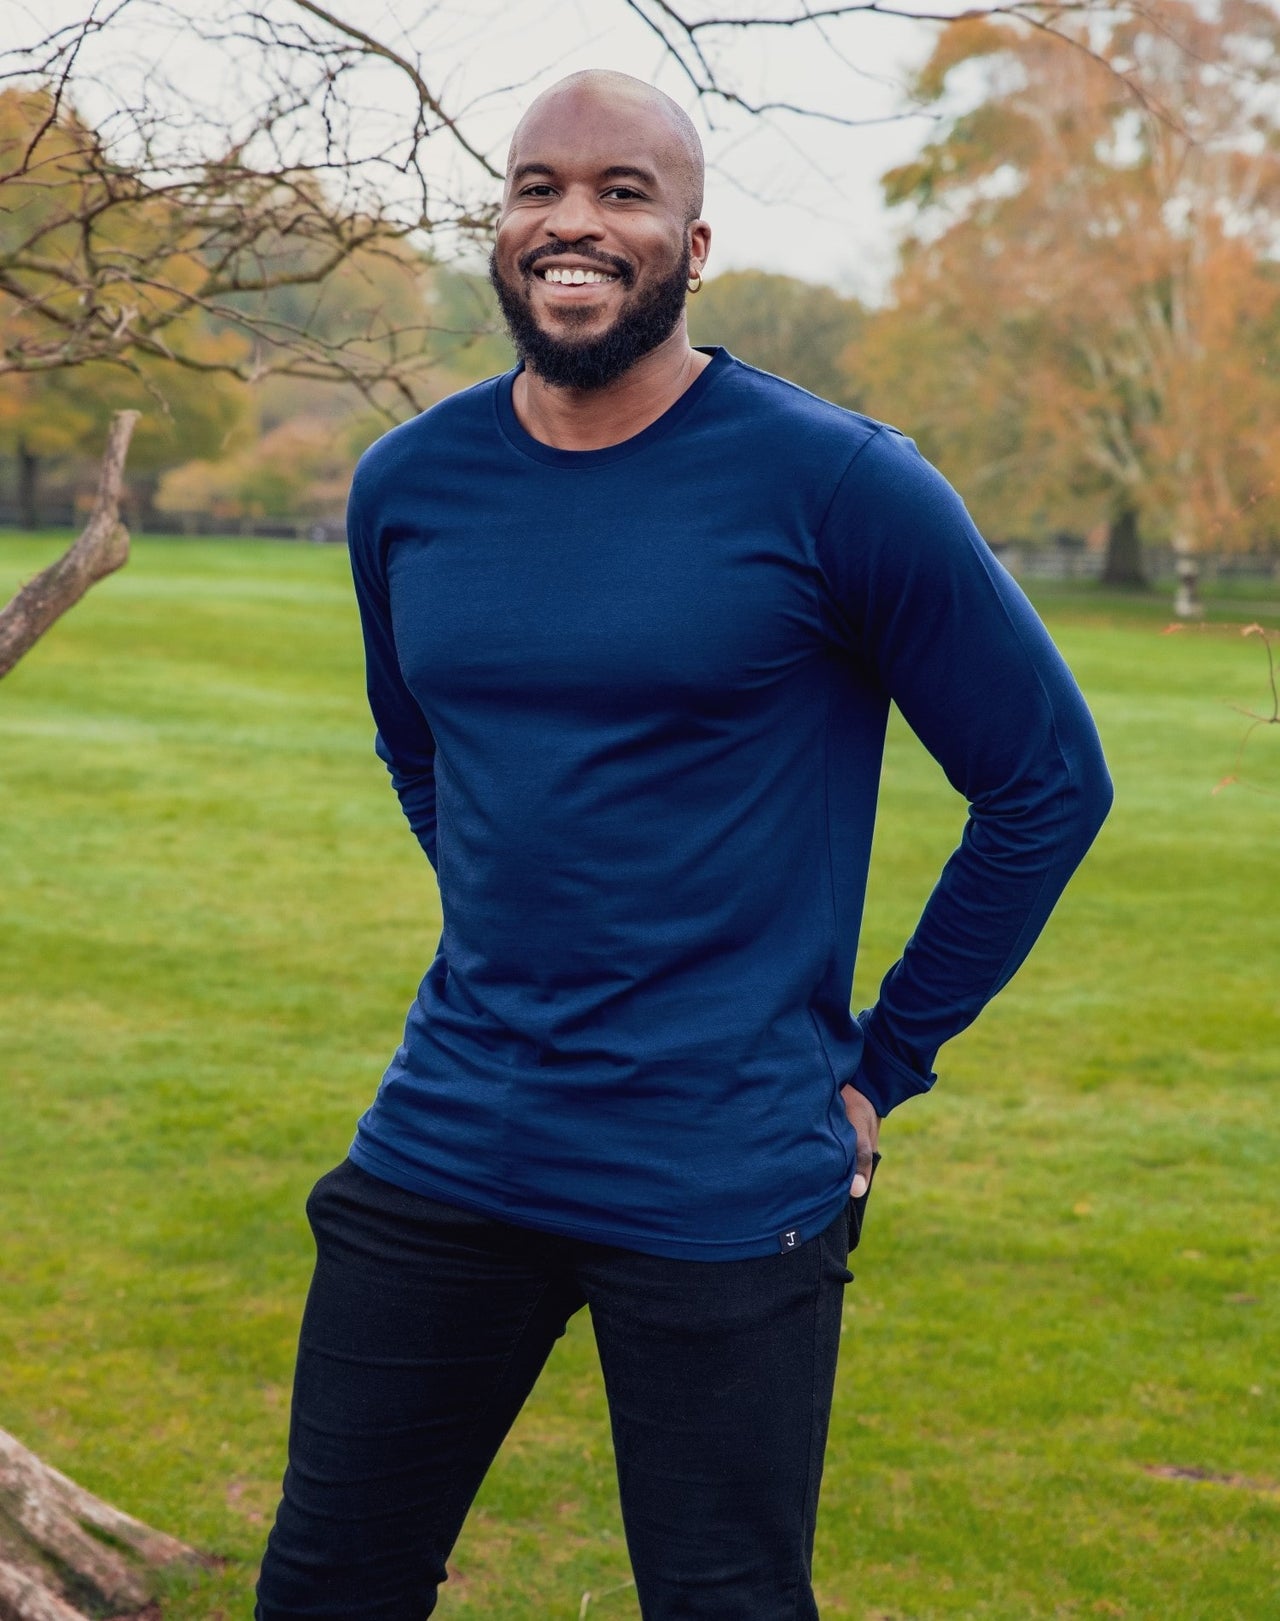 A tall athletic guy wearing a long sleeve navy tall t-shirt and smiling in a park with hands behind back.